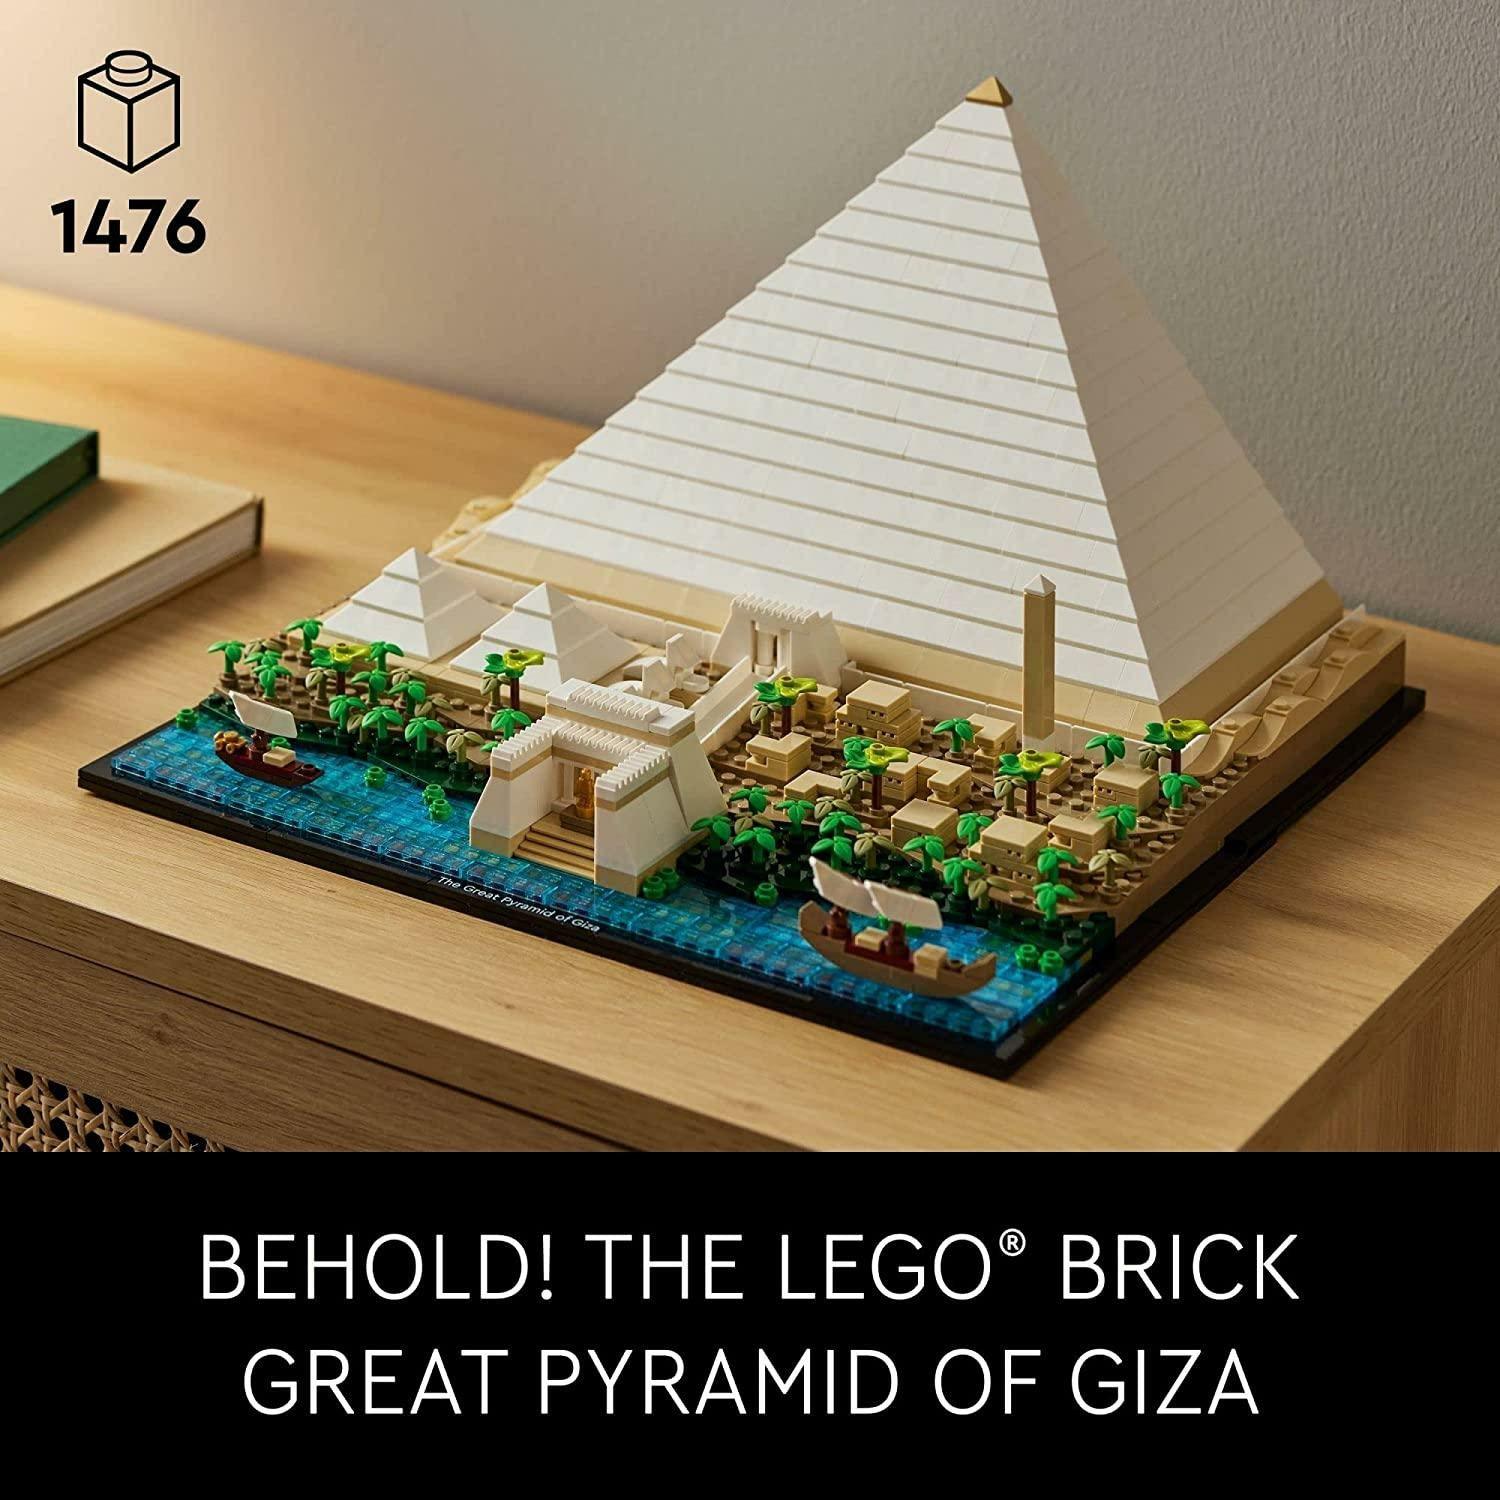 LEGO Architecture Landmark Collection Great Pyramid of Giza 21058 Building Set (1,476 Pieces) - BumbleToys - 18+, Architecture, Boys, Girls, LEGO, OXE, Pre-Order